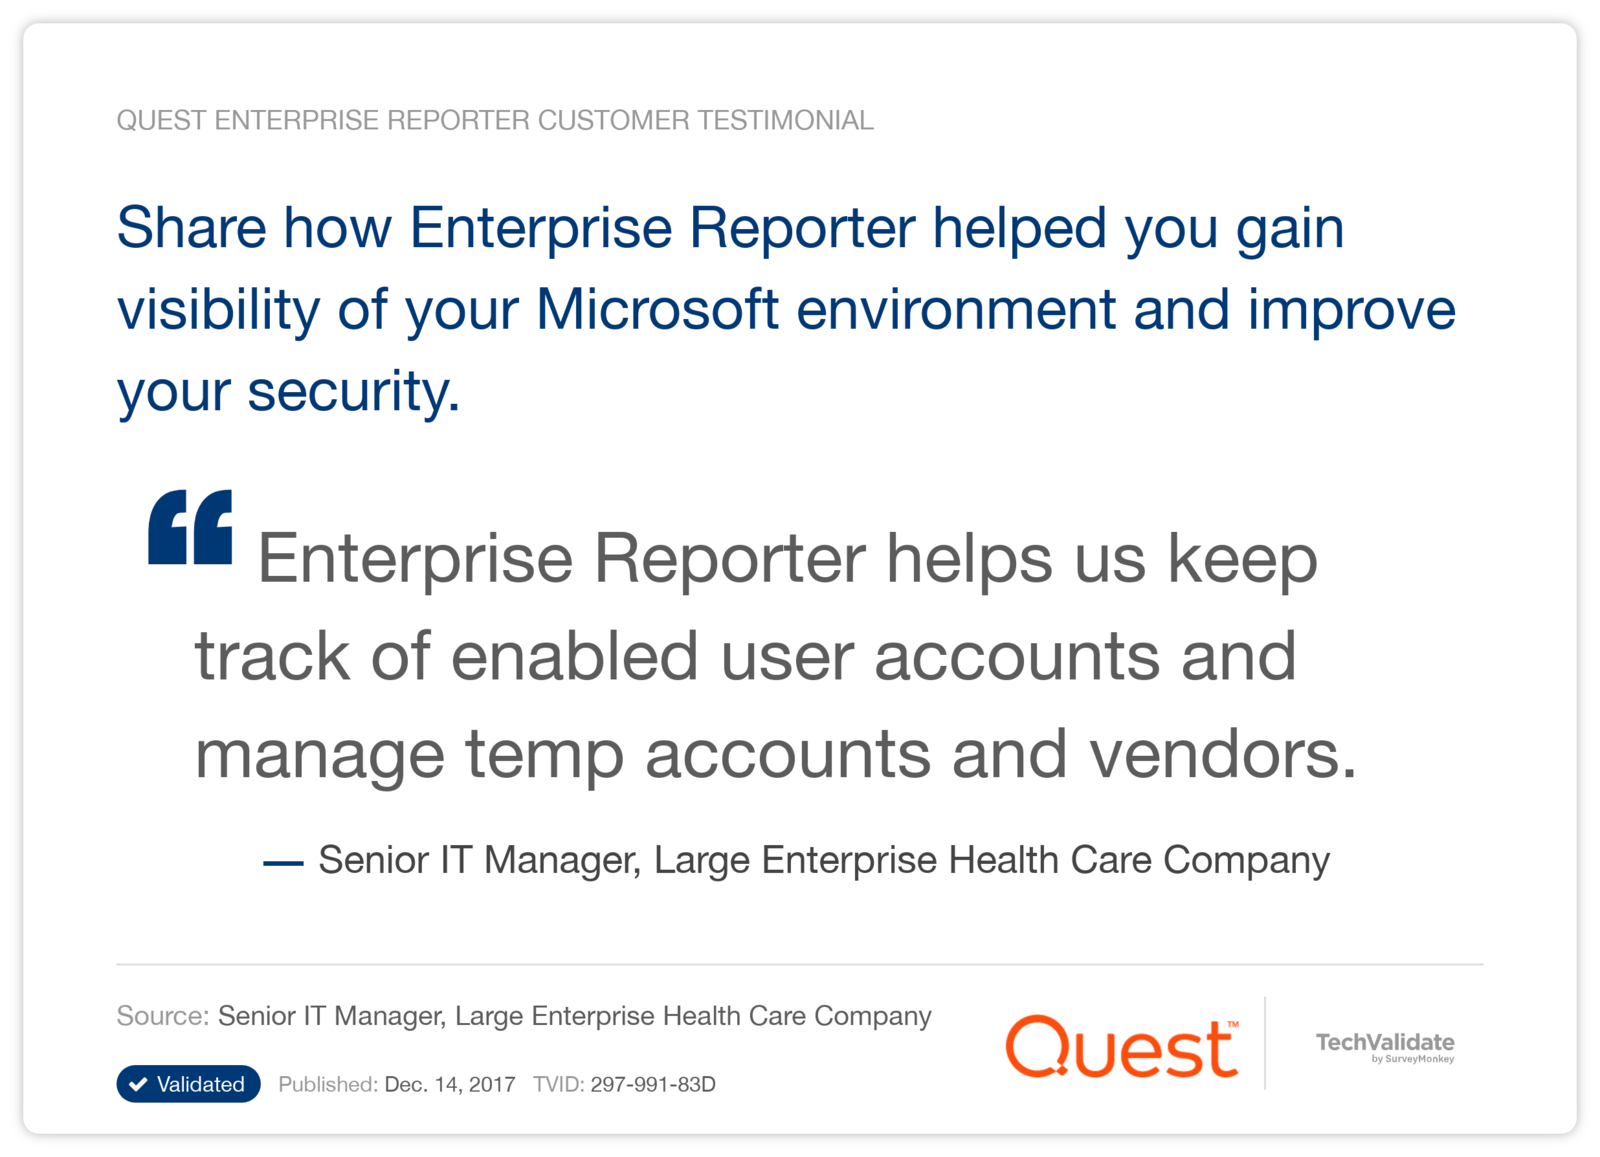 Share how Enterprise Reporter helped you gain visibility of your Microsoft environment and improve your security.